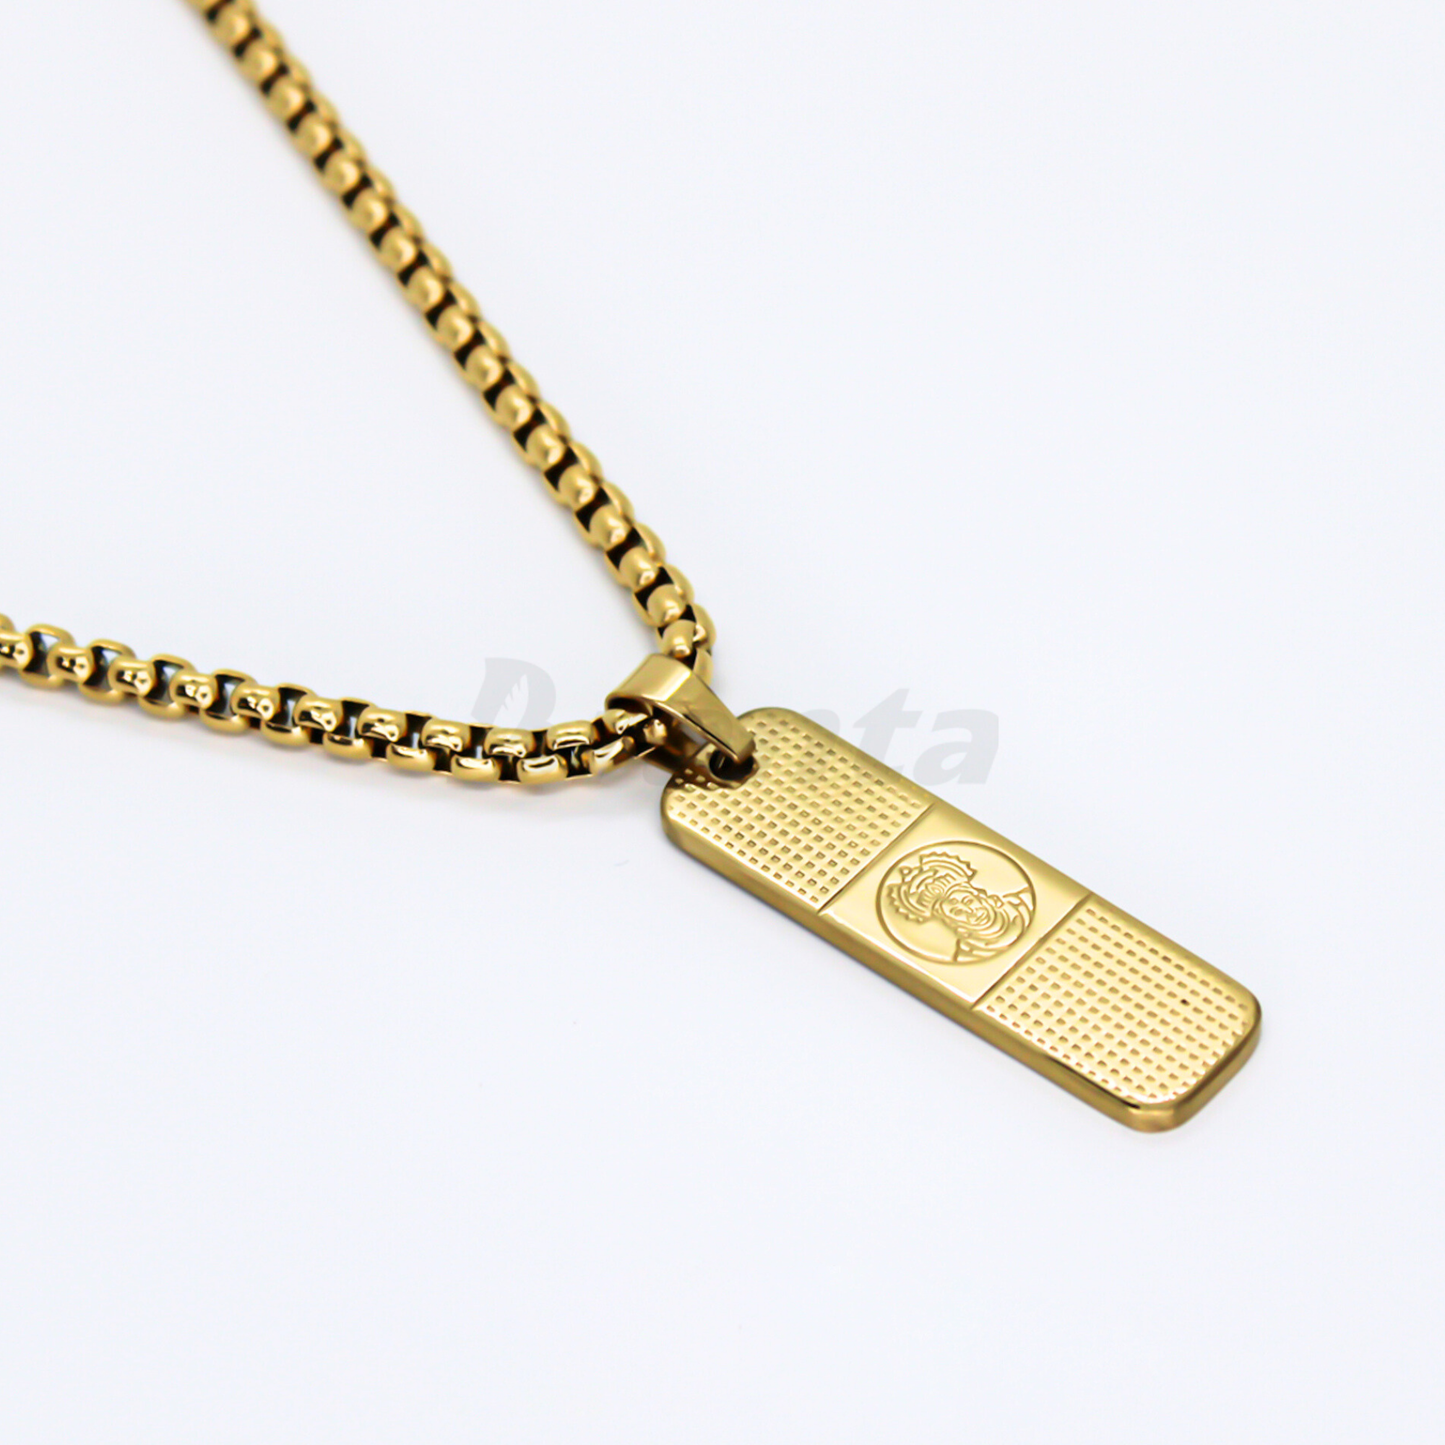 Hanuman Pendant With Dotted Pattern Gold Stainless Steel Necklace Chain For Men (24 Inch)